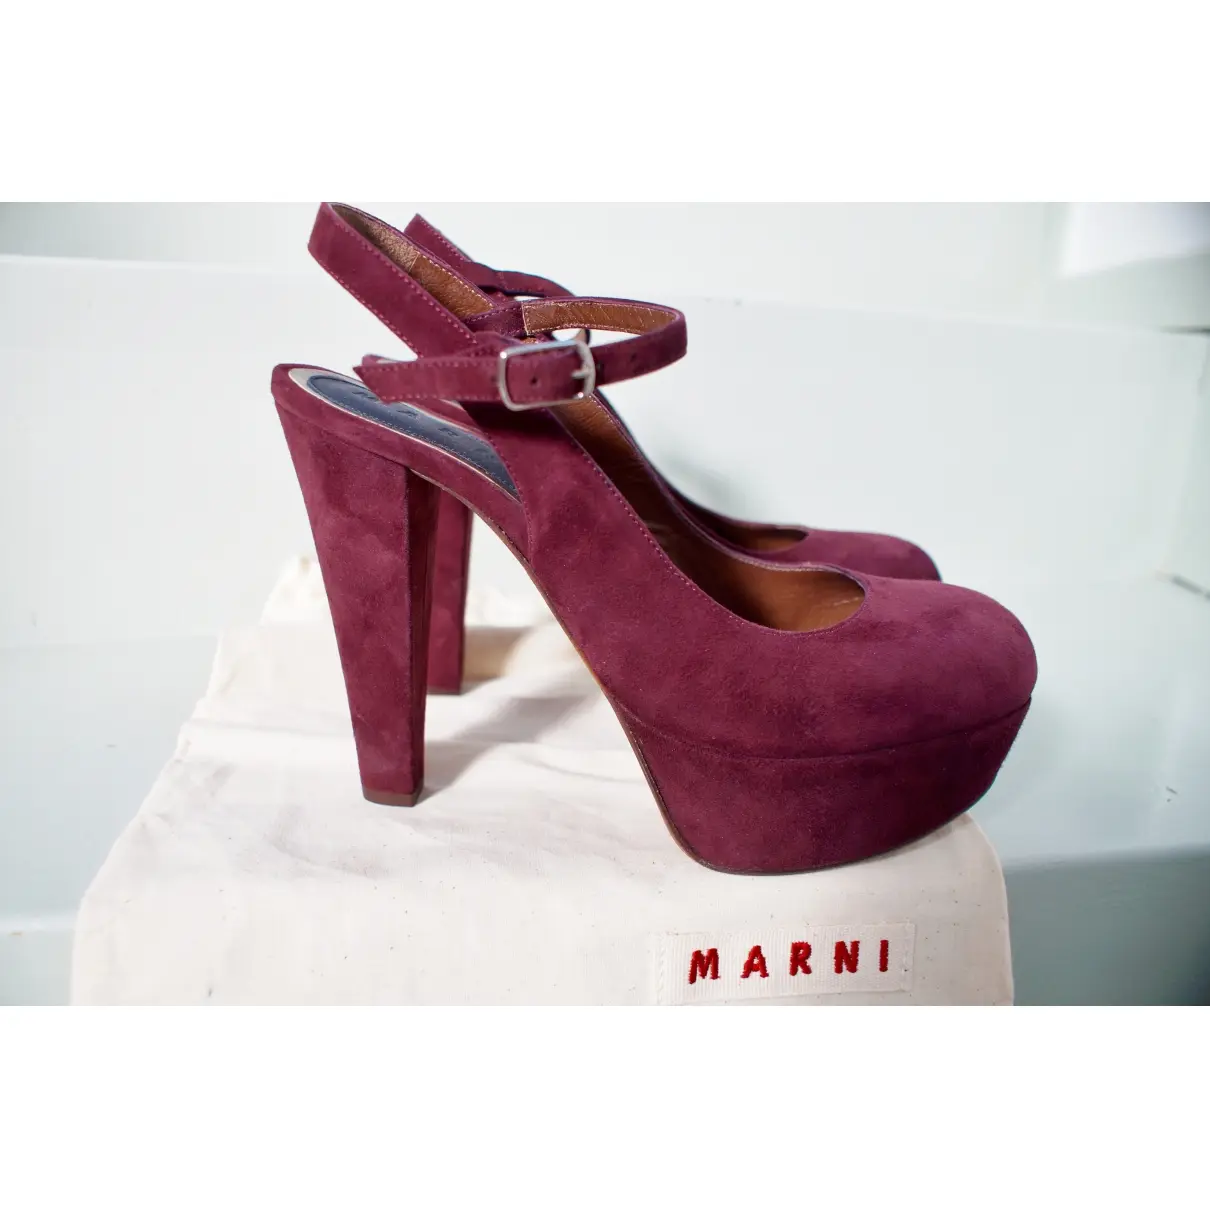 Marni Sandals for sale